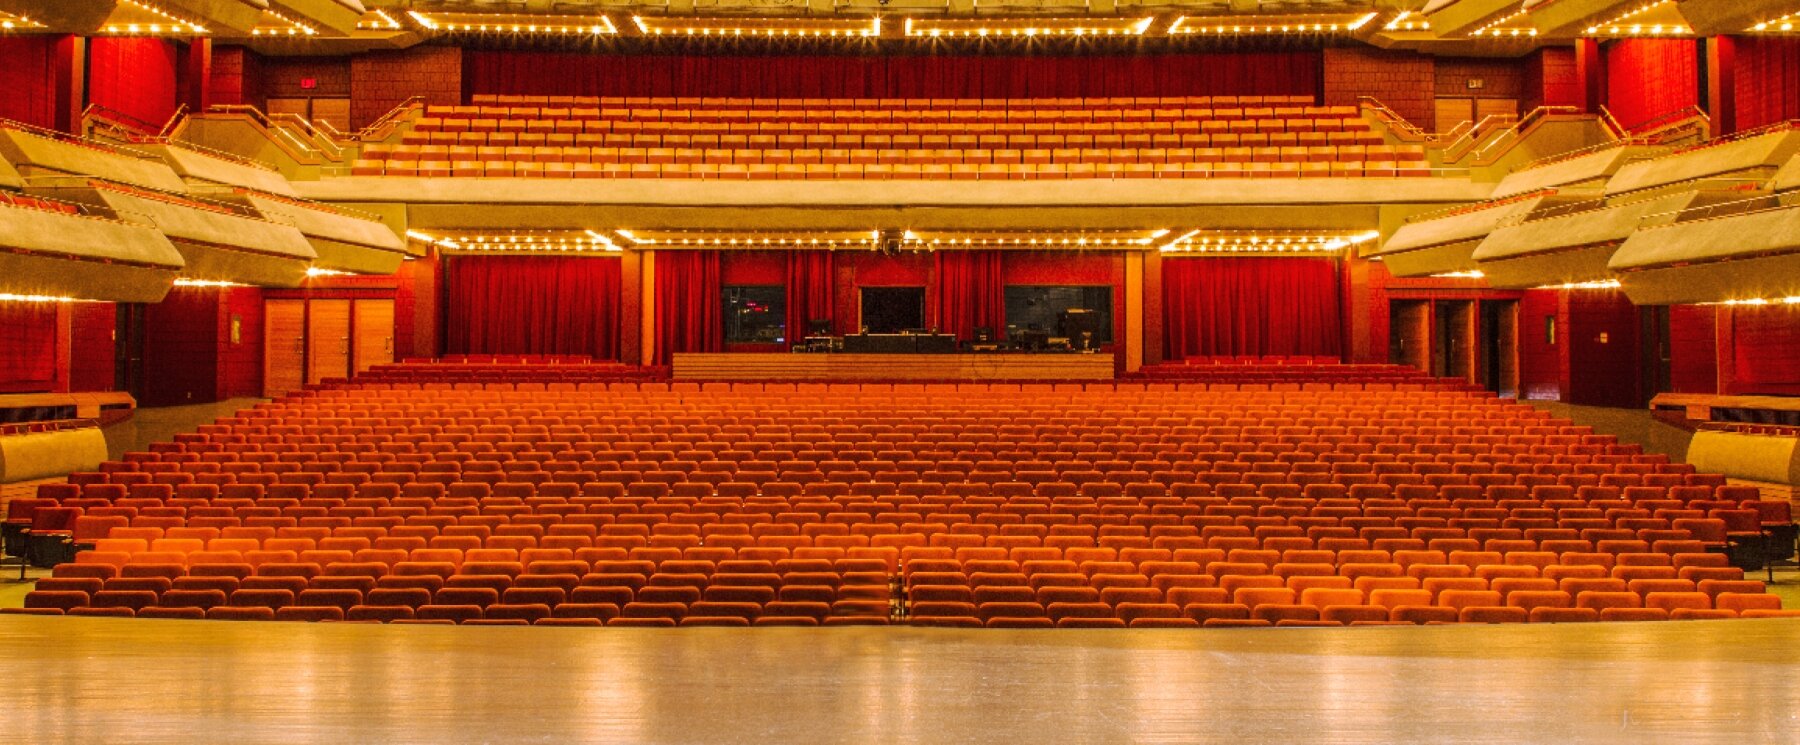 Photo 1: The inside of the Thunder Bay Community Auditorium, where I attended a presentation by David Foot, author of Boom, Bust and Echo. I sat on the top right balcony. Image from: https://www.visitthunderbay.com/…/see-and-do/community-audi…;